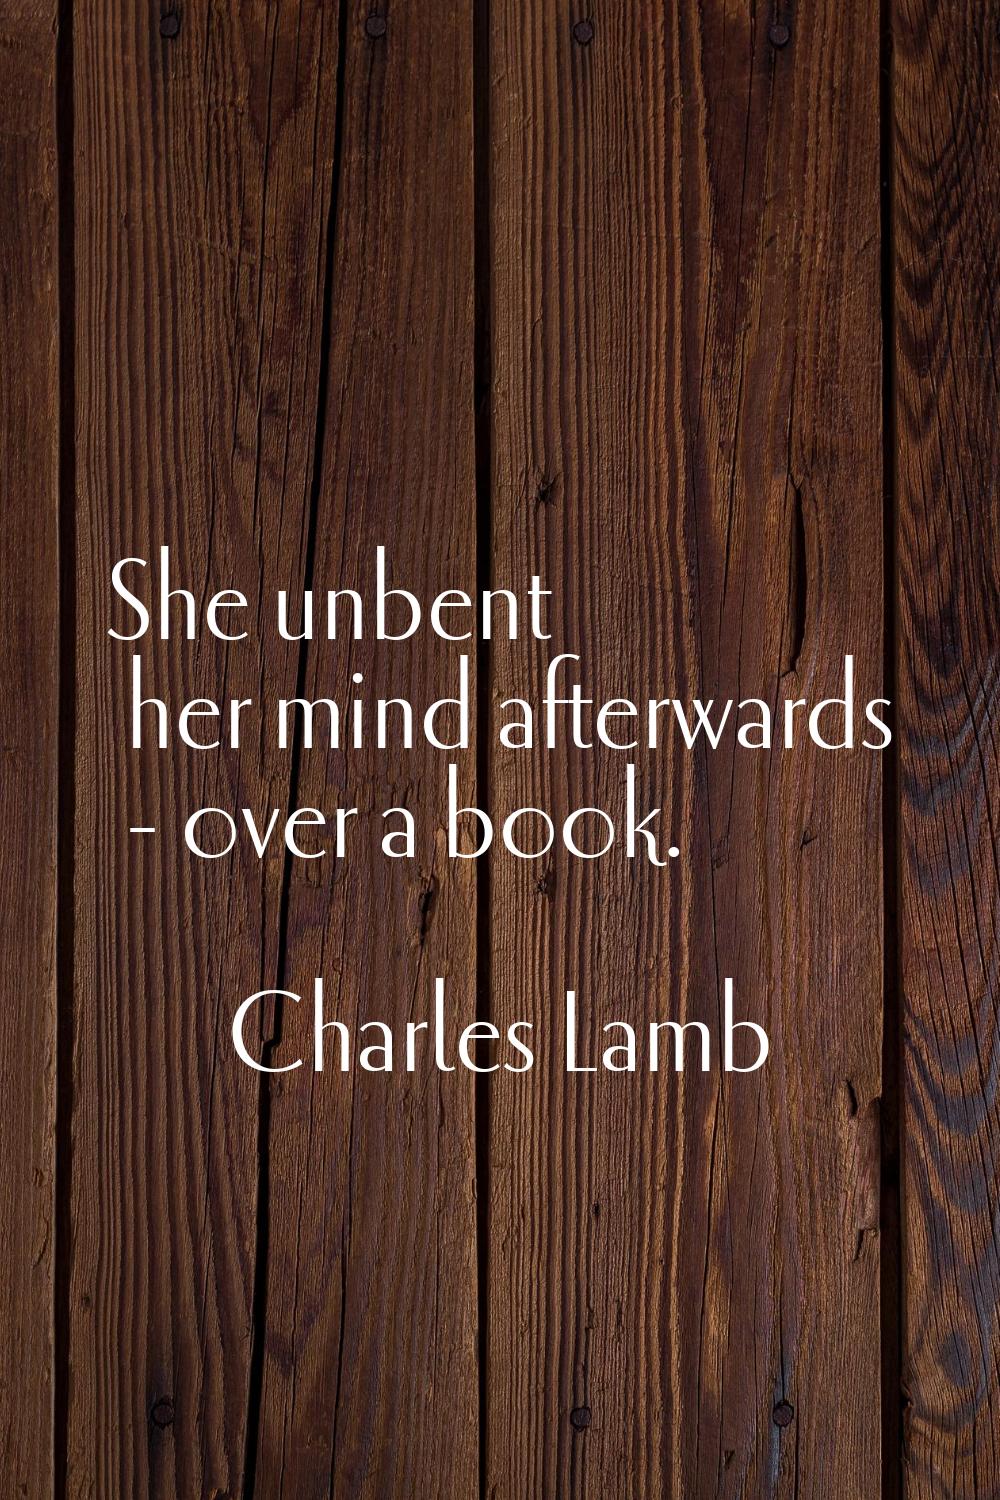 She unbent her mind afterwards - over a book.